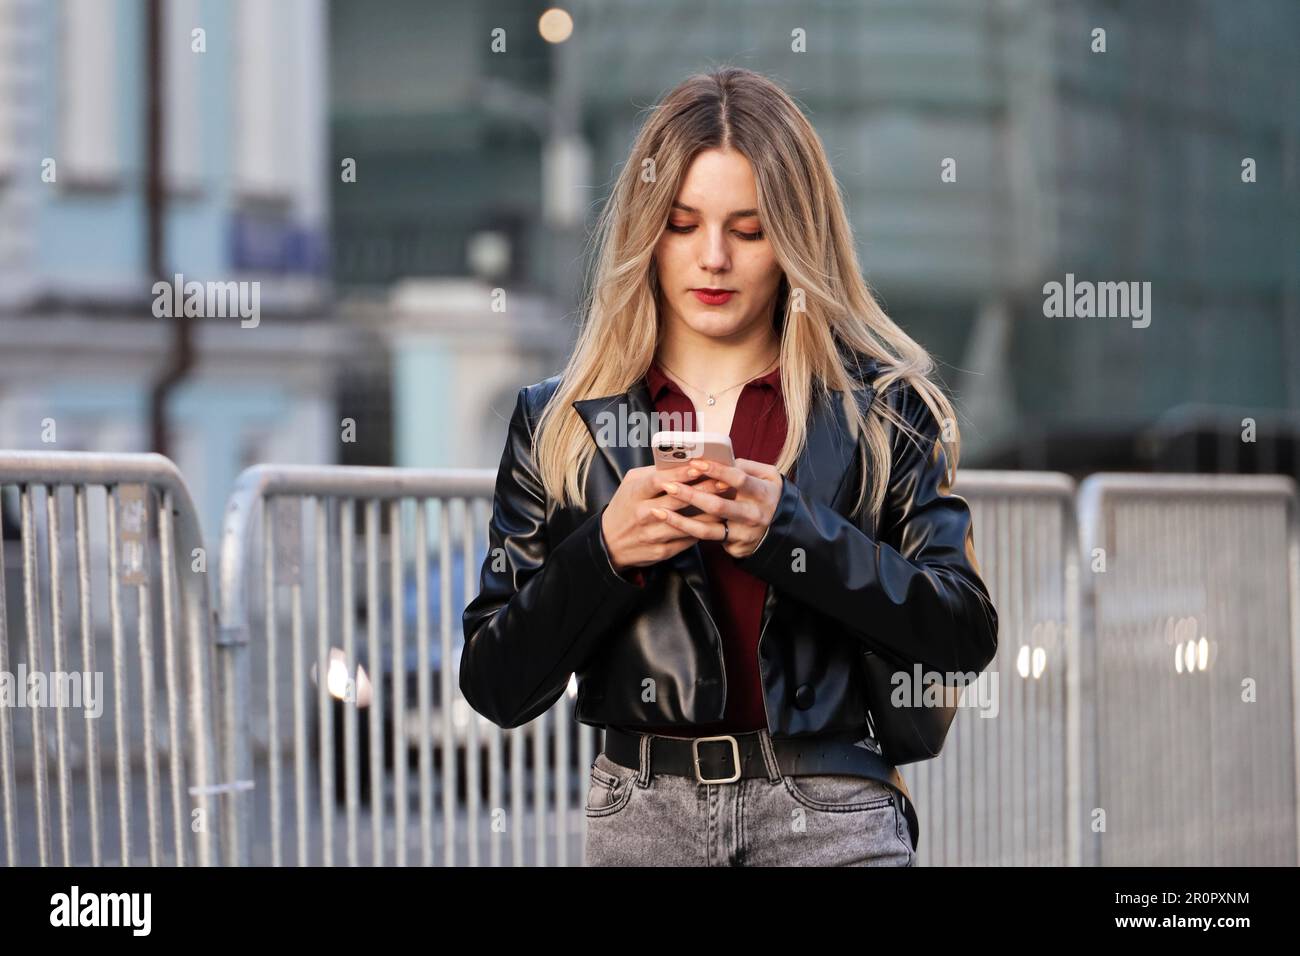 Blonde girl in black jacket walking down a street with smartphone. Using mobile phone in spring city Stock Photo